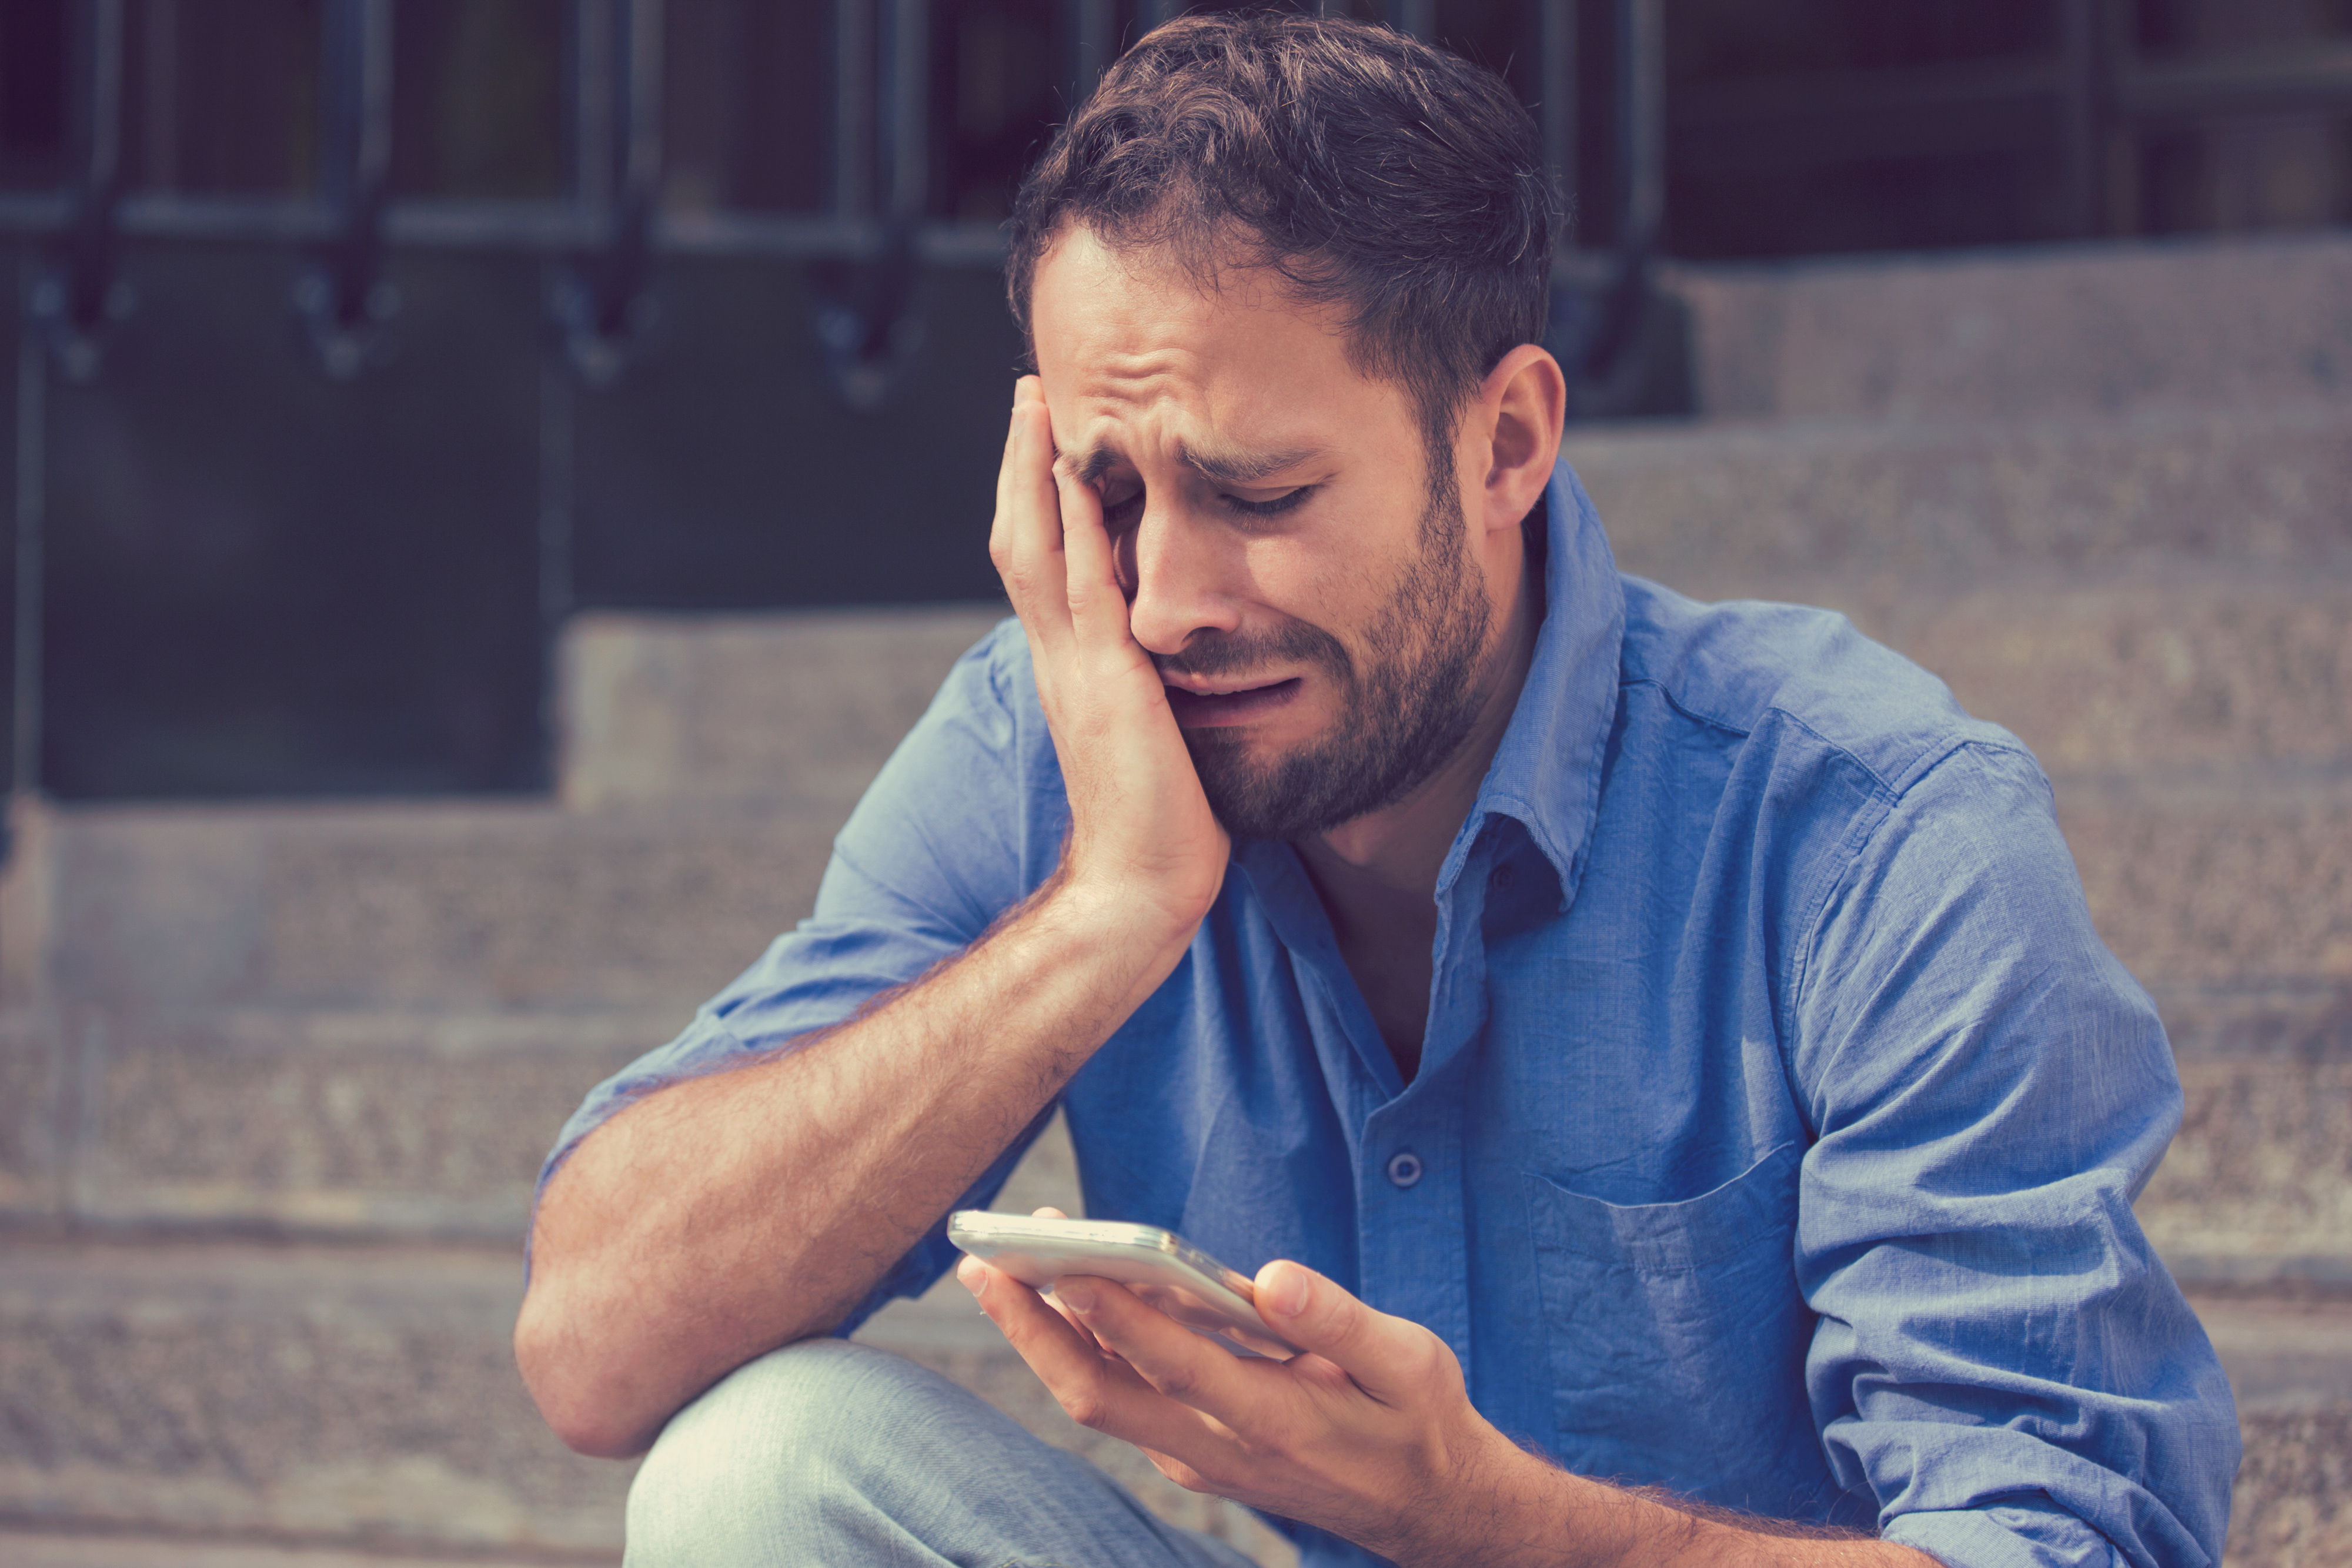 A man crying as he reads a text | Source: Shutterstock